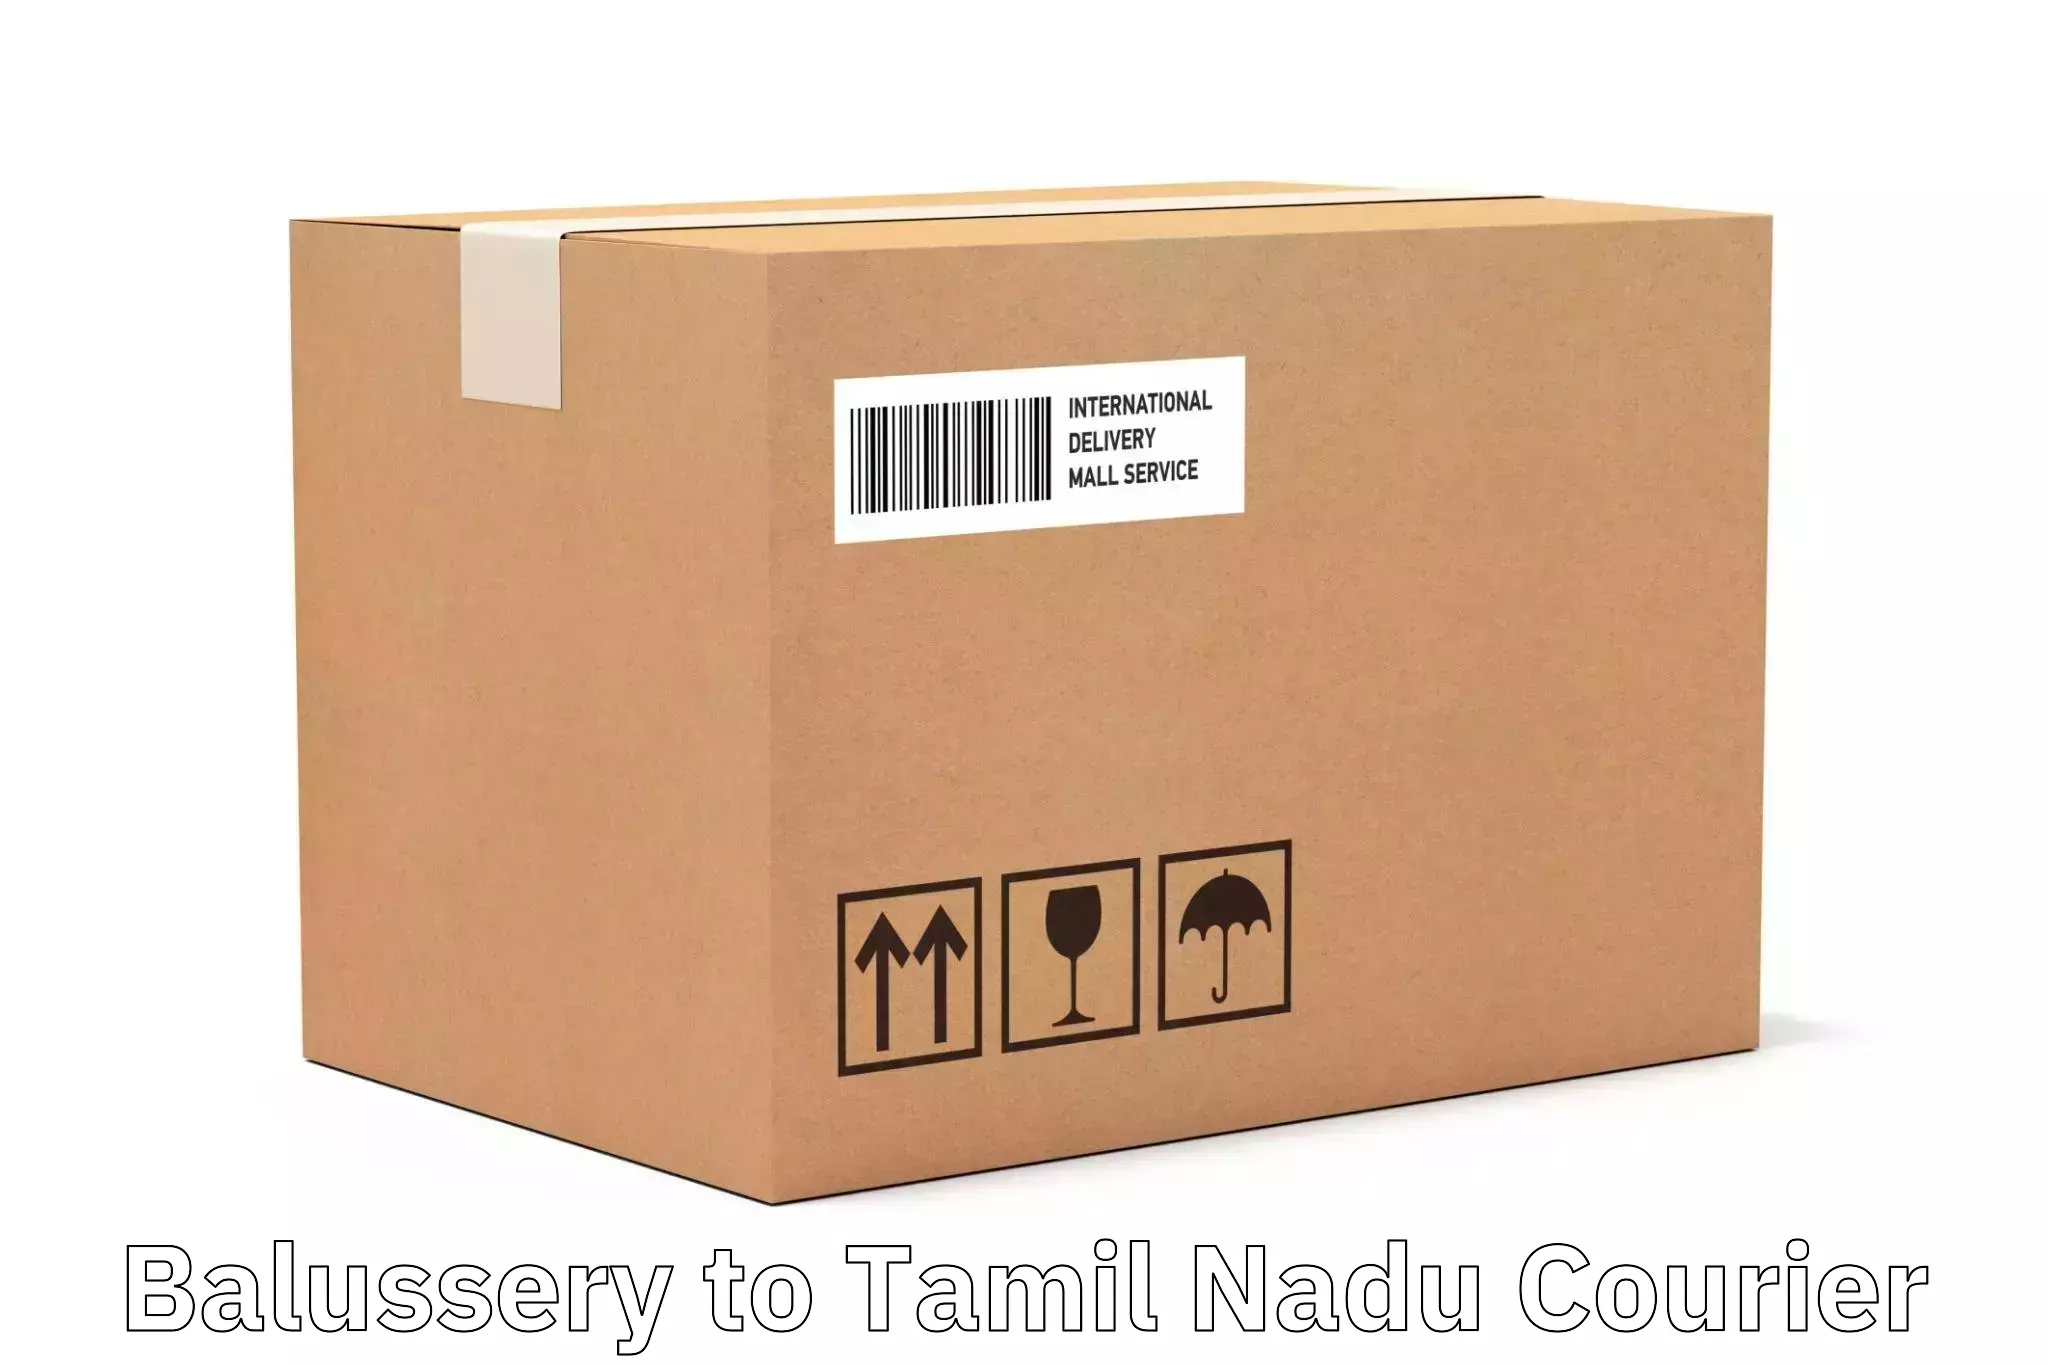 Speedy delivery service Balussery to Dindigul